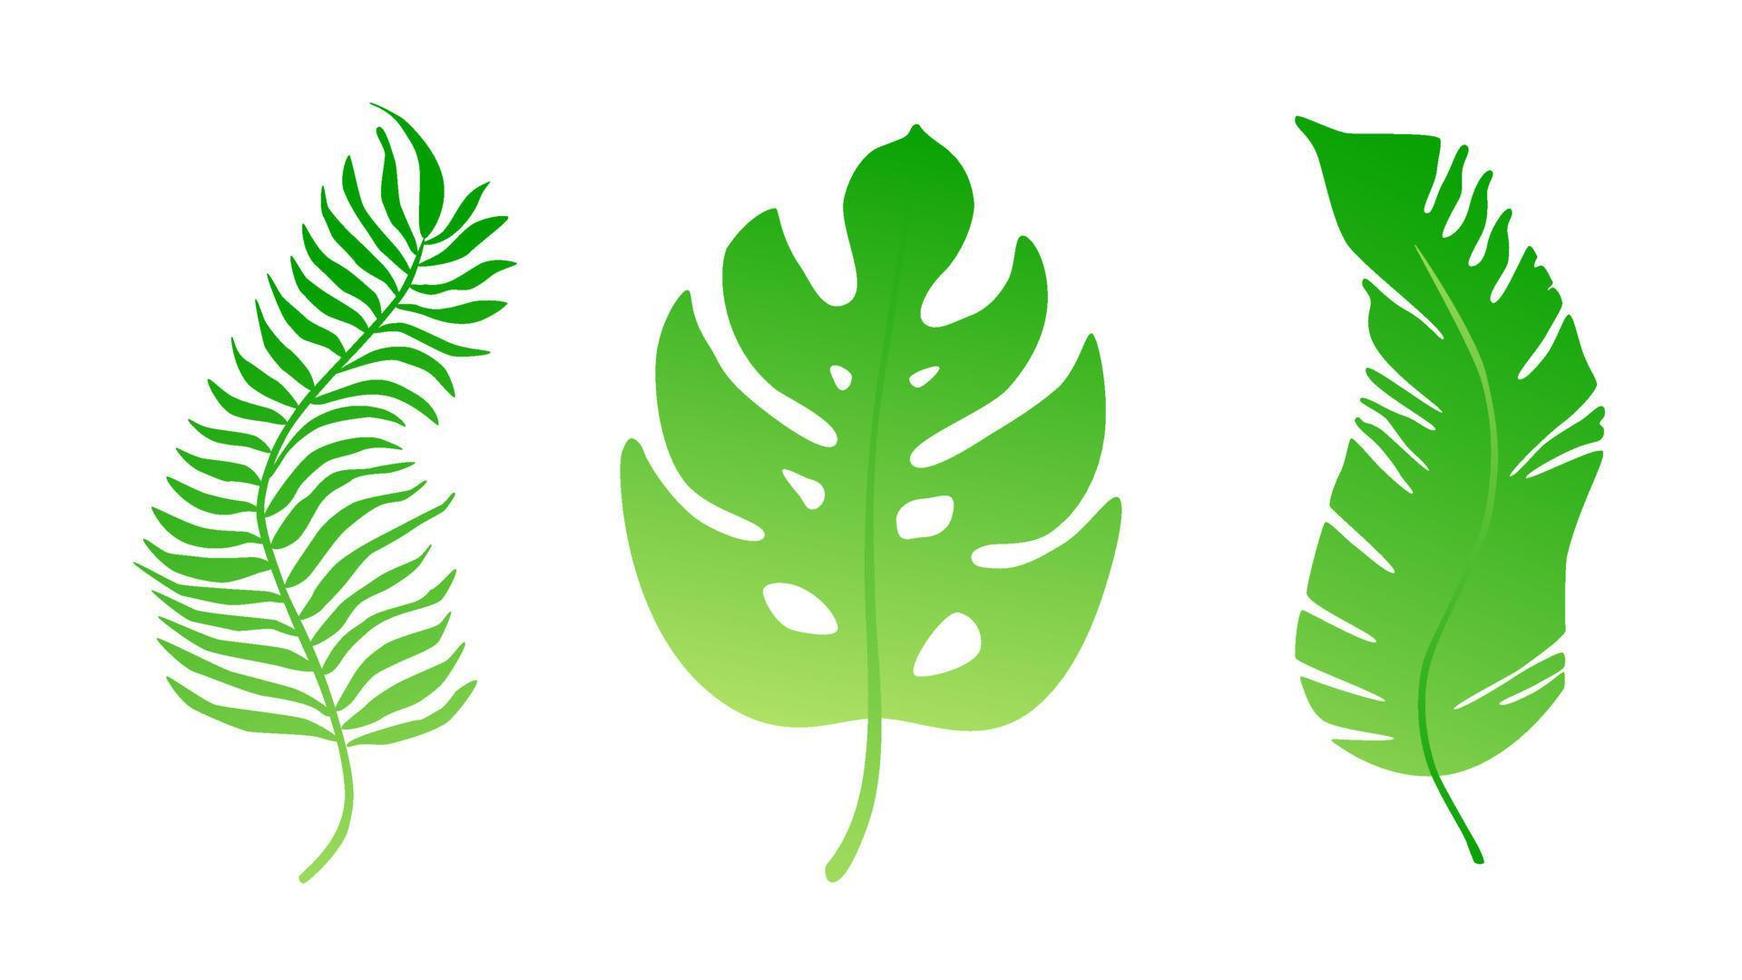 3 Tropical leaves set flat style design vector illustration isolated on white background gradient version